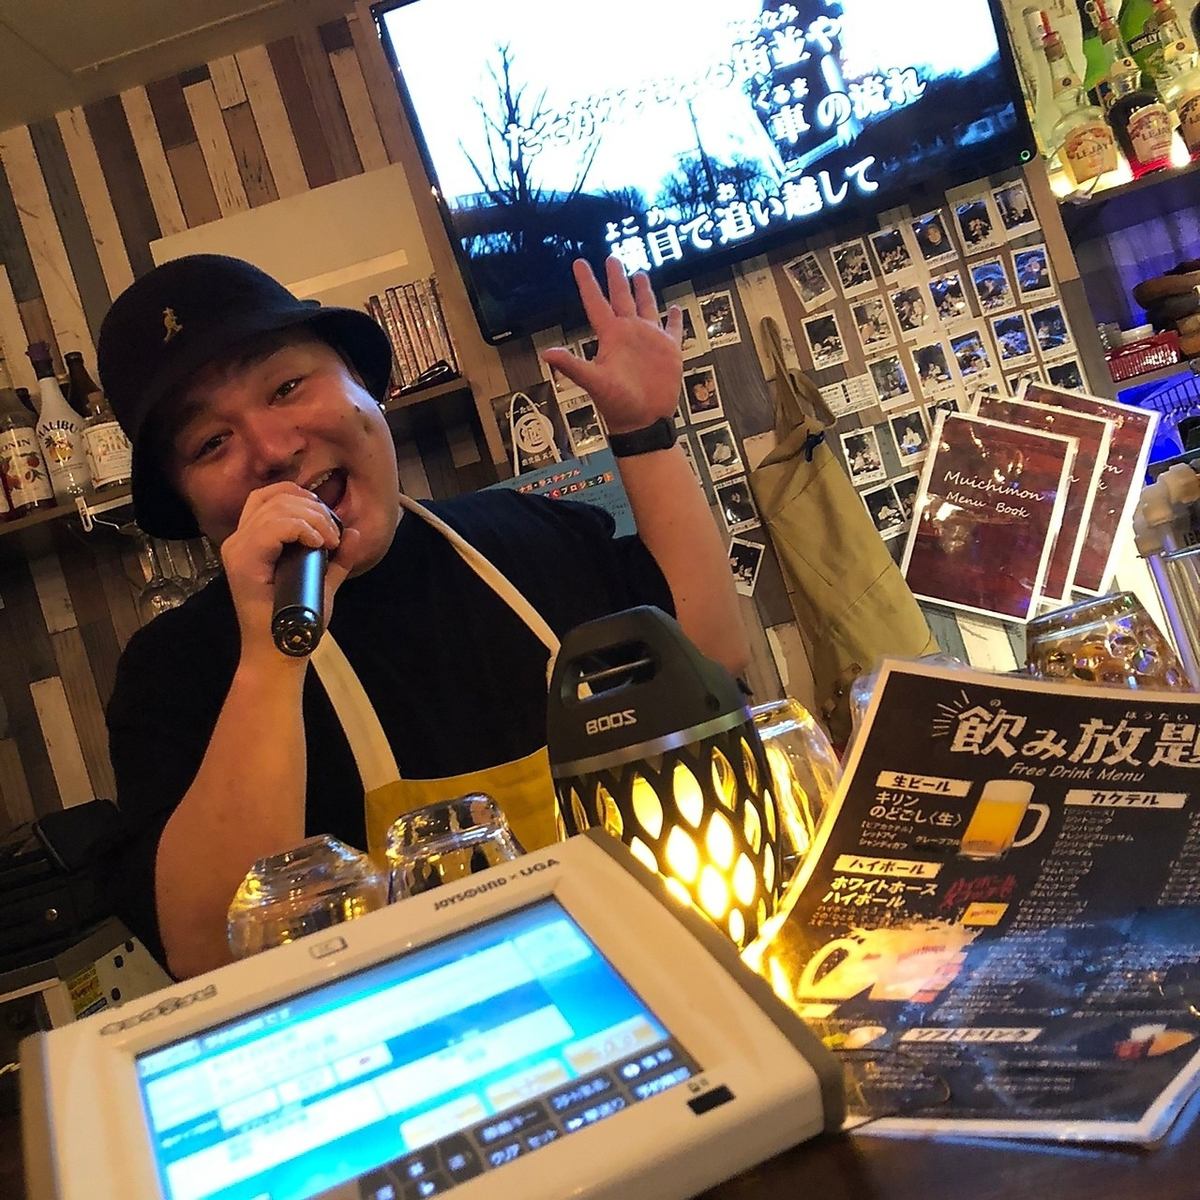 Infectious disease prevention measures ◎ Private room available ♪ Sofa seats ♪ Cheap all-you-can-drink and enjoy karaoke ♪